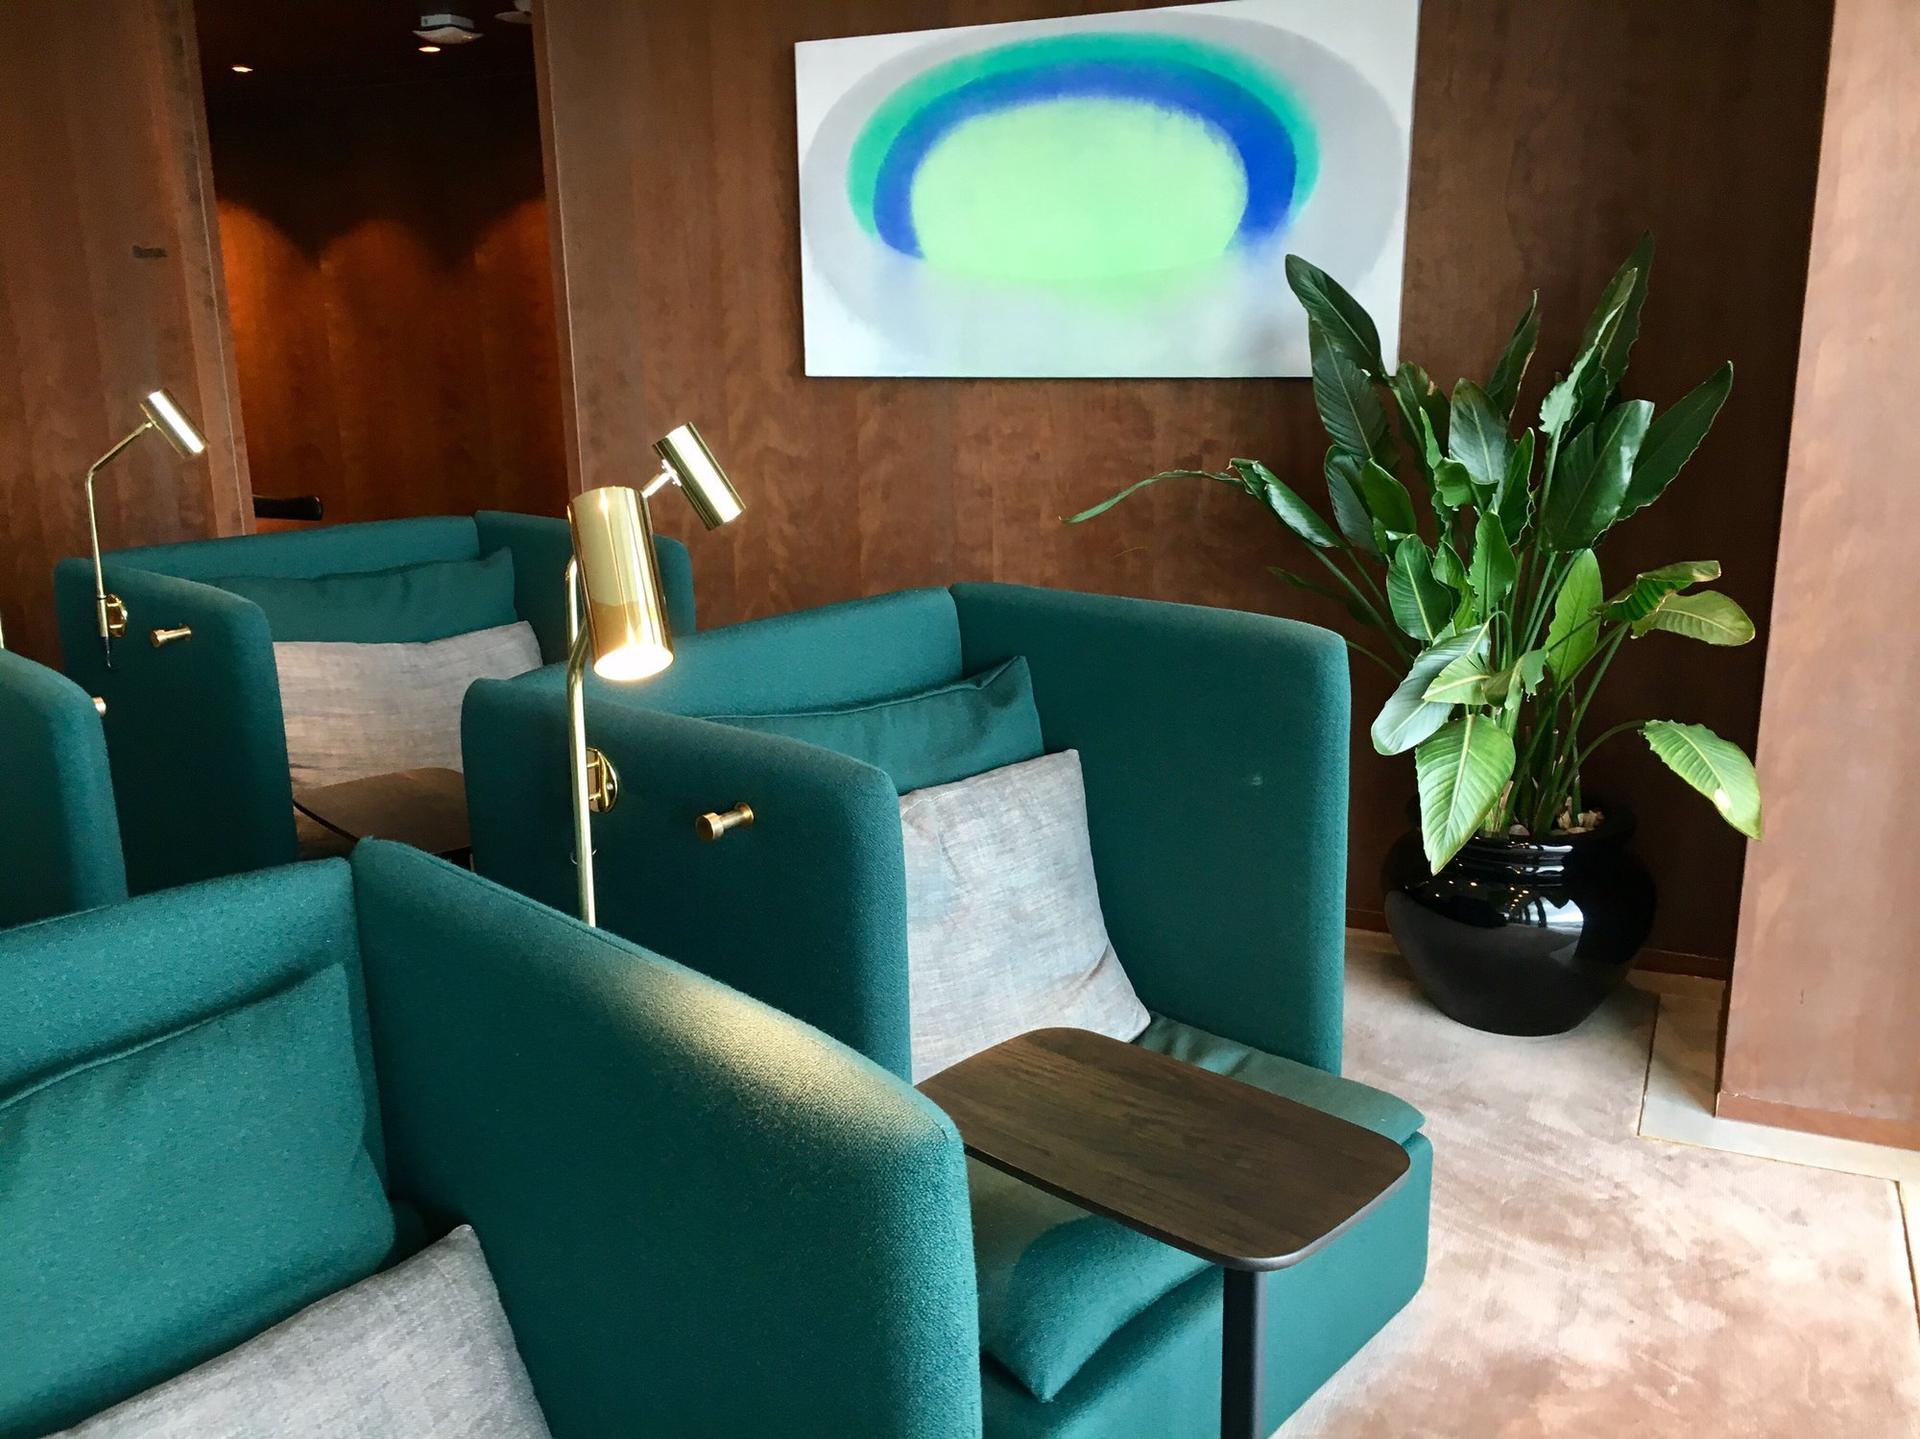 Cathay Pacific Business Class Lounge image 31 of 48